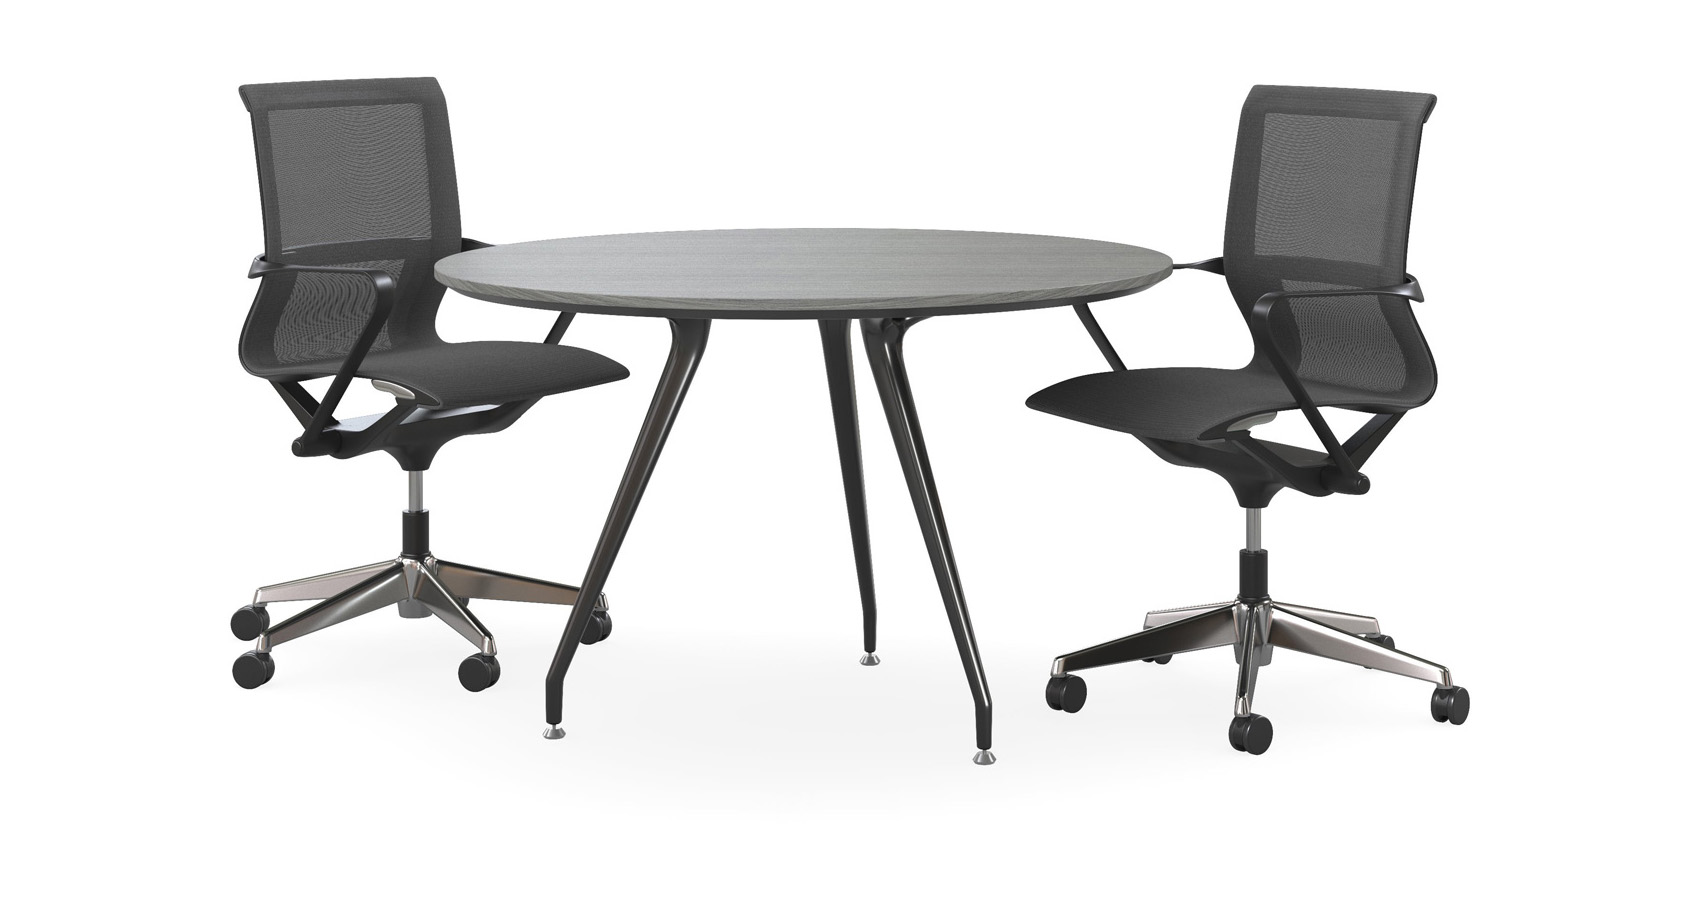 Velo Round Conference Table with Zed chairs